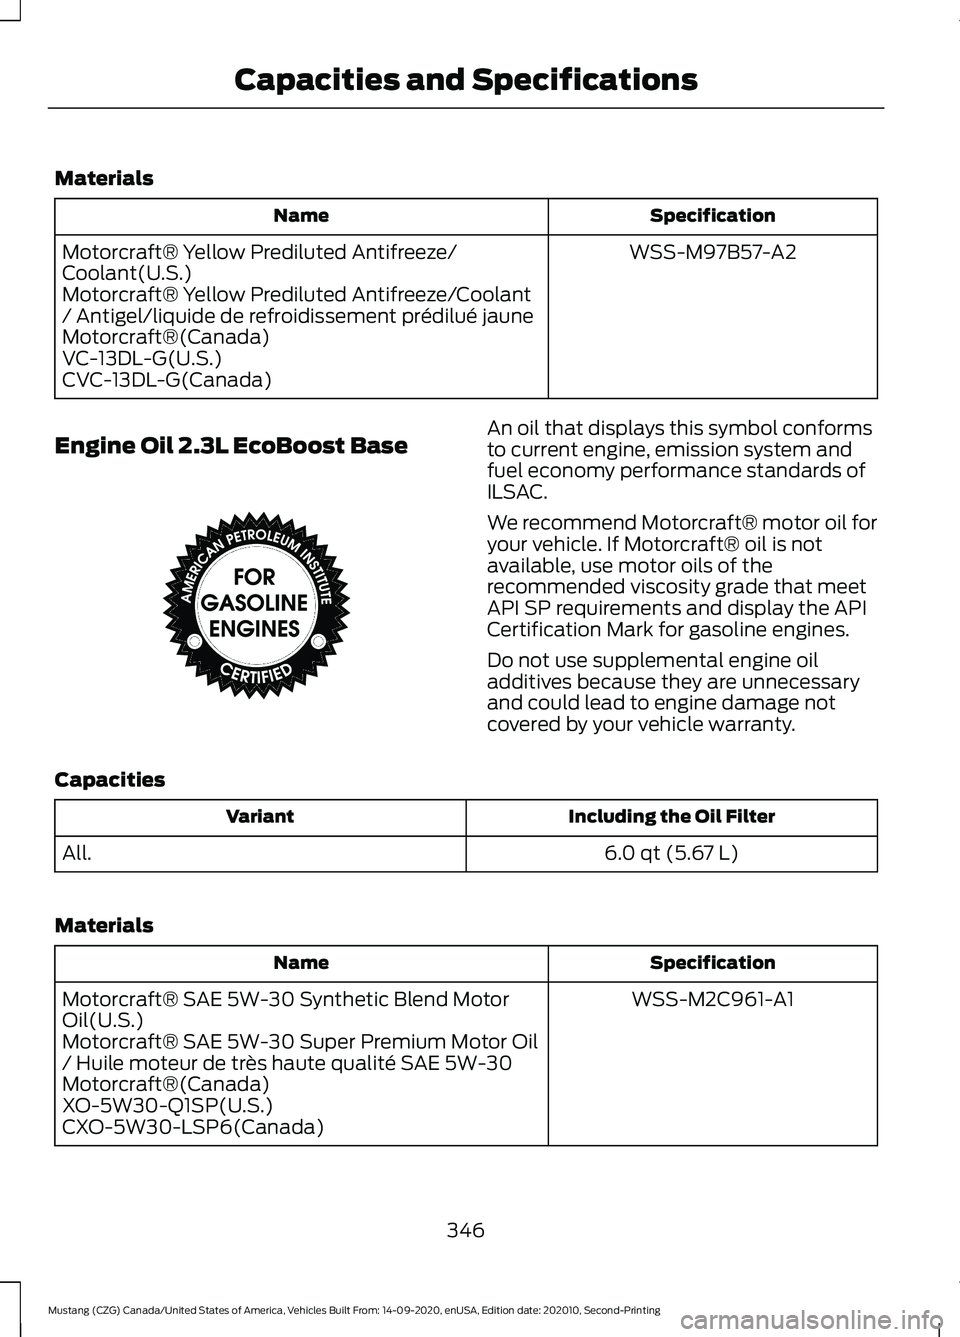 FORD MUSTANG 2021  Owners Manual Materials
Specification
Name
WSS-M97B57-A2
Motorcraft® Yellow Prediluted Antifreeze/
Coolant(U.S.)
Motorcraft® Yellow Prediluted Antifreeze/Coolant
/ Antigel/liquide de refroidissement prédilué ja